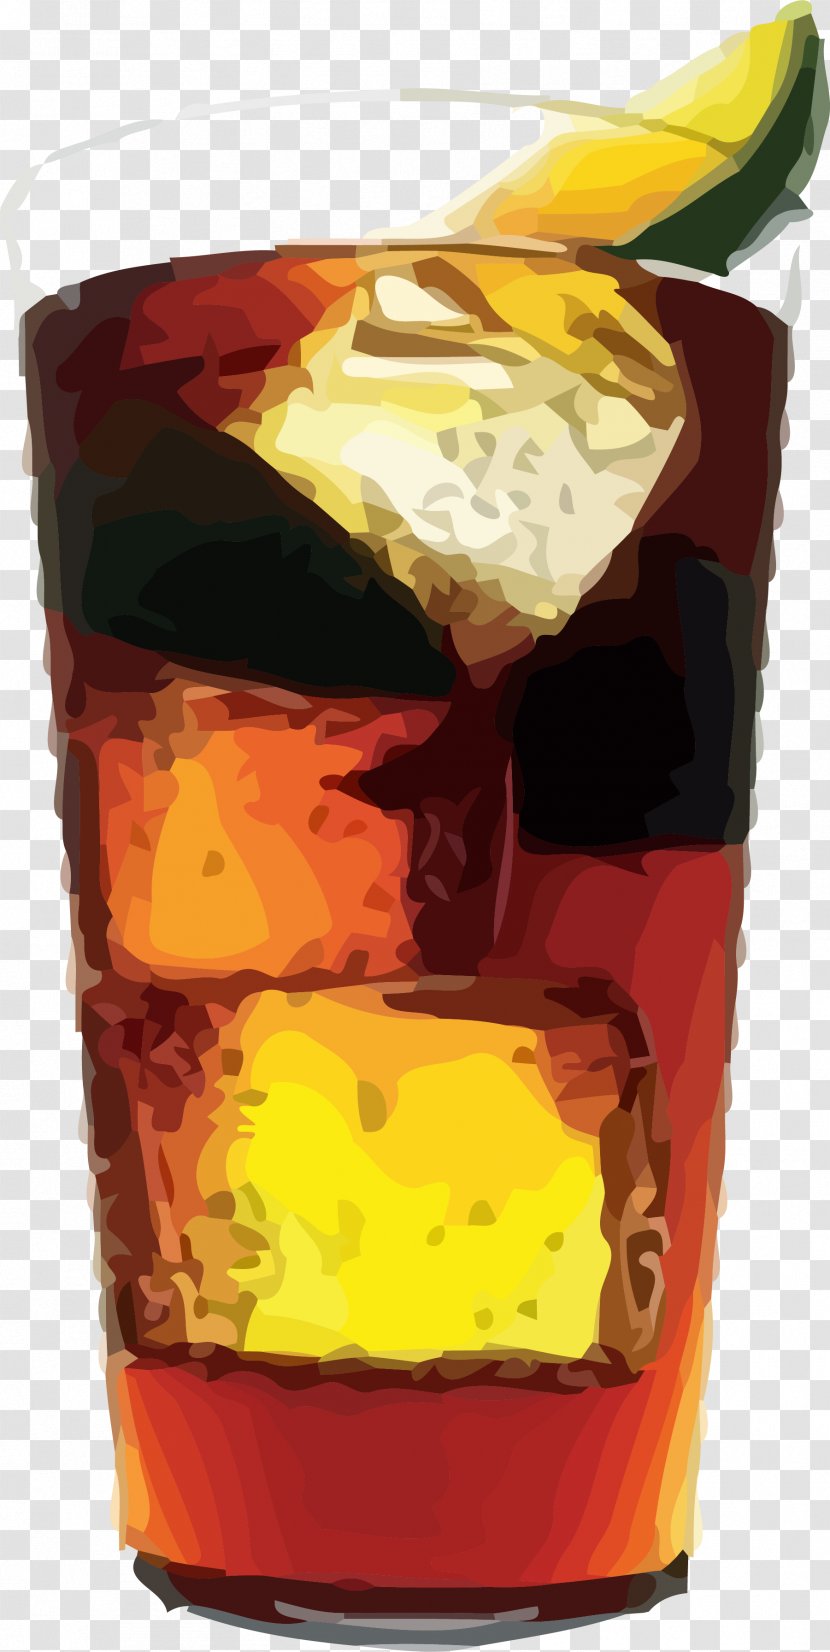 Whisky Cocktail Gin Rum Vodka - Old Fashioned Glass - Iced Milk Tea Transparent PNG